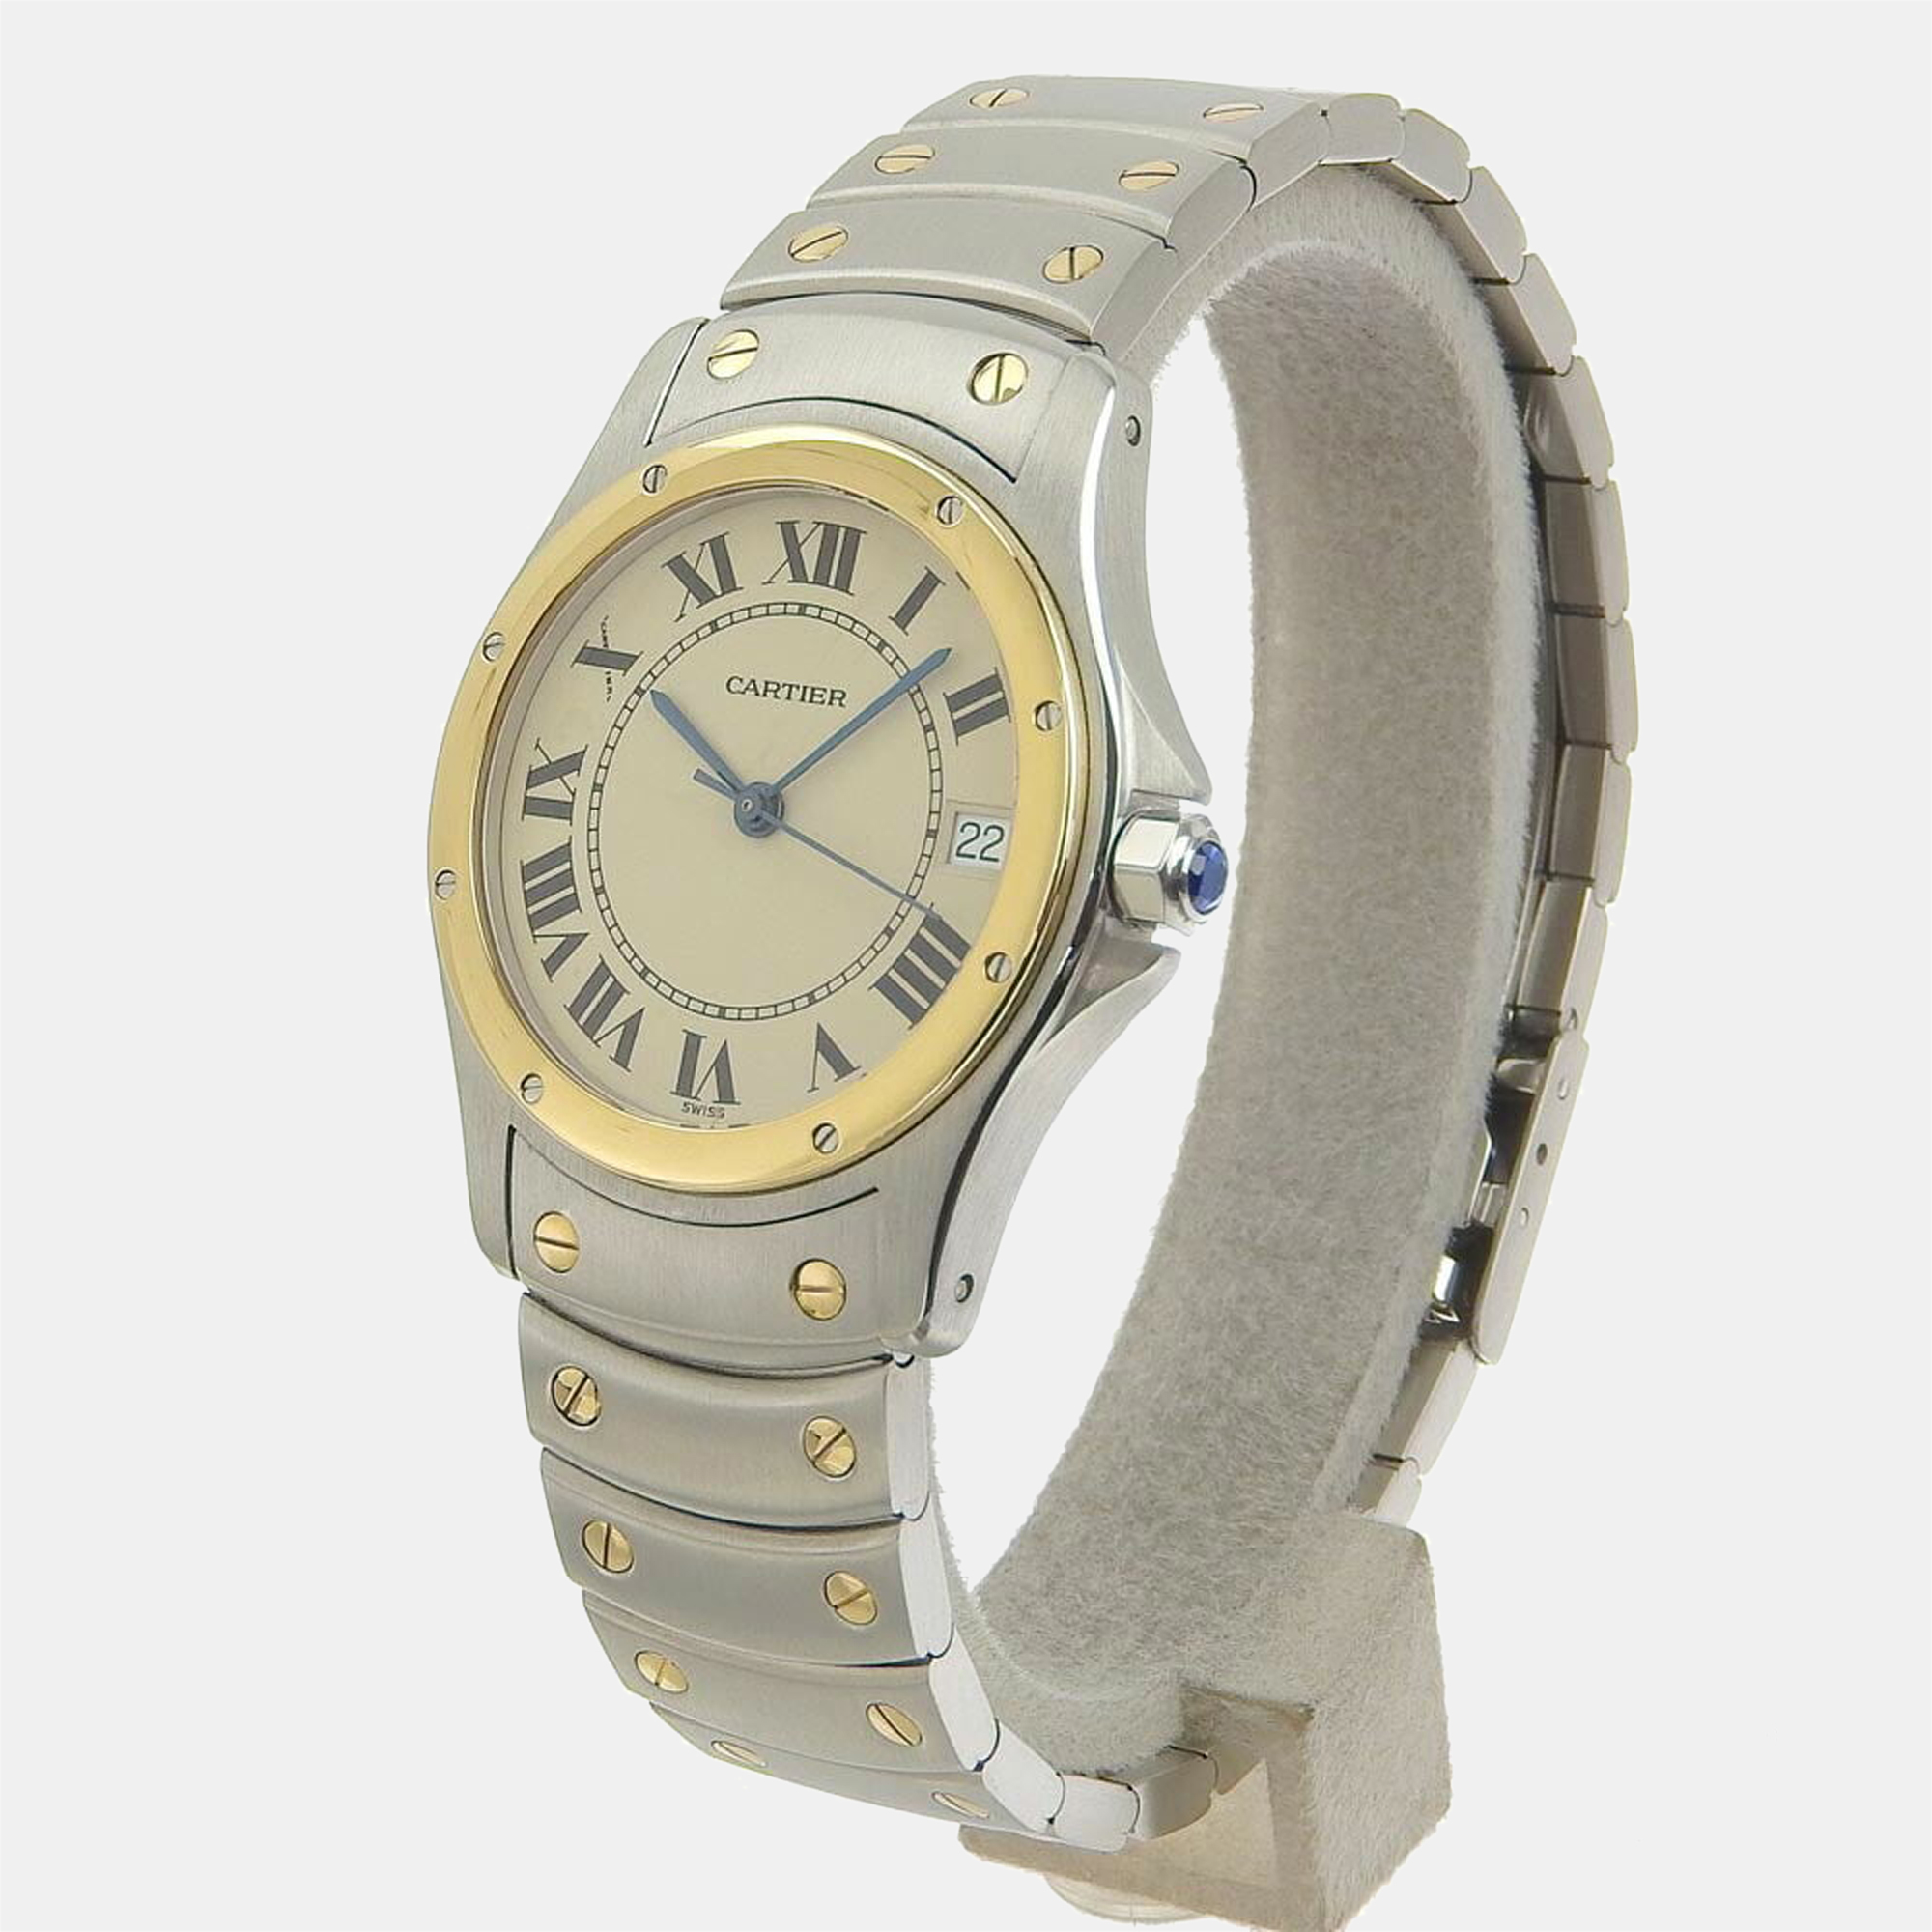 Pre-owned Cartier White 18k Yellow Gold And Stainless Steel Santos Cougar W20036r3 Quartz Men's Wristwatch 33 Mm